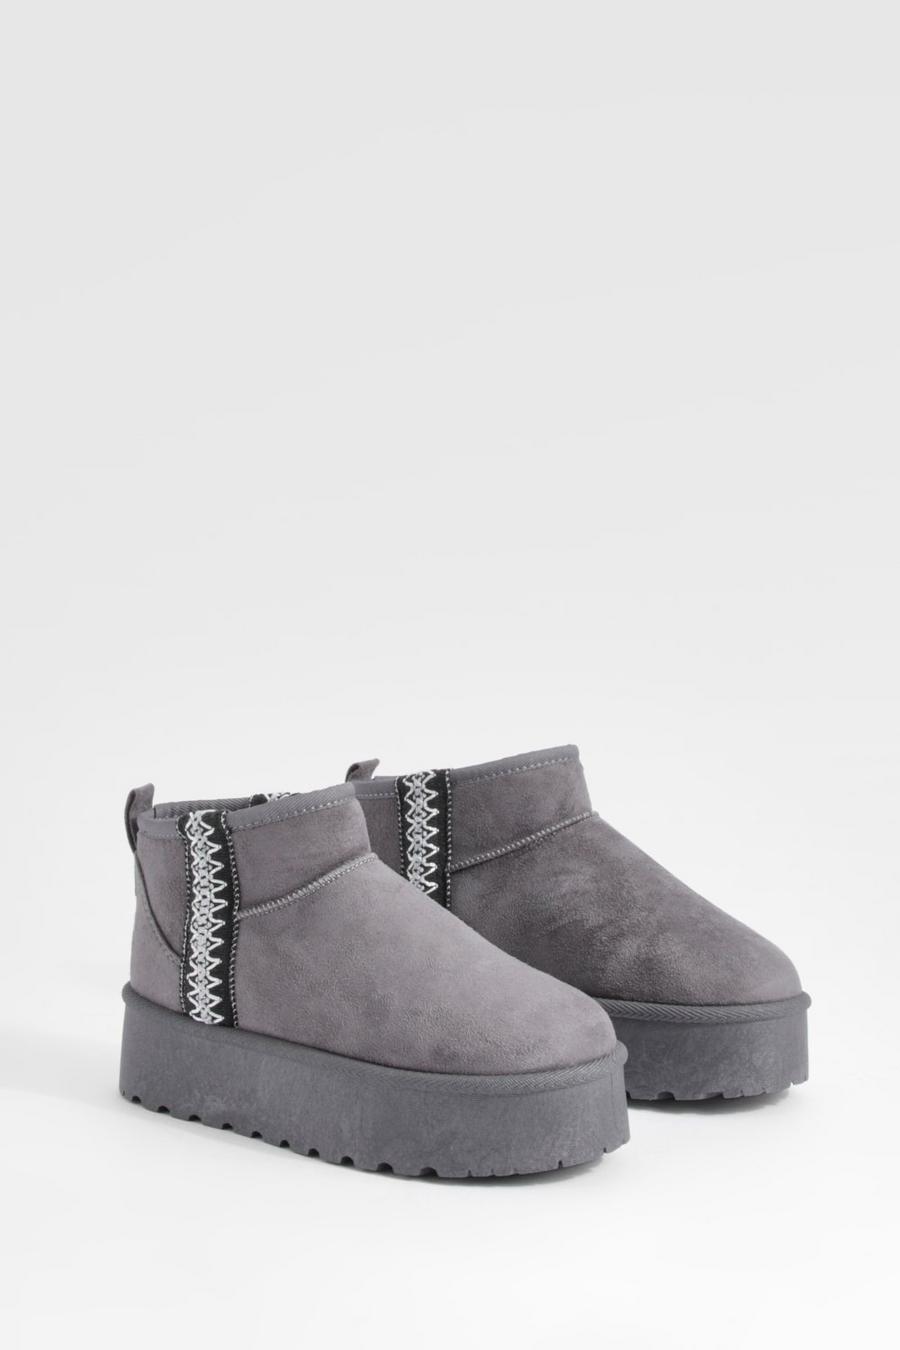 Grey Ultra Mini Embroidered Platform Cozy Boots